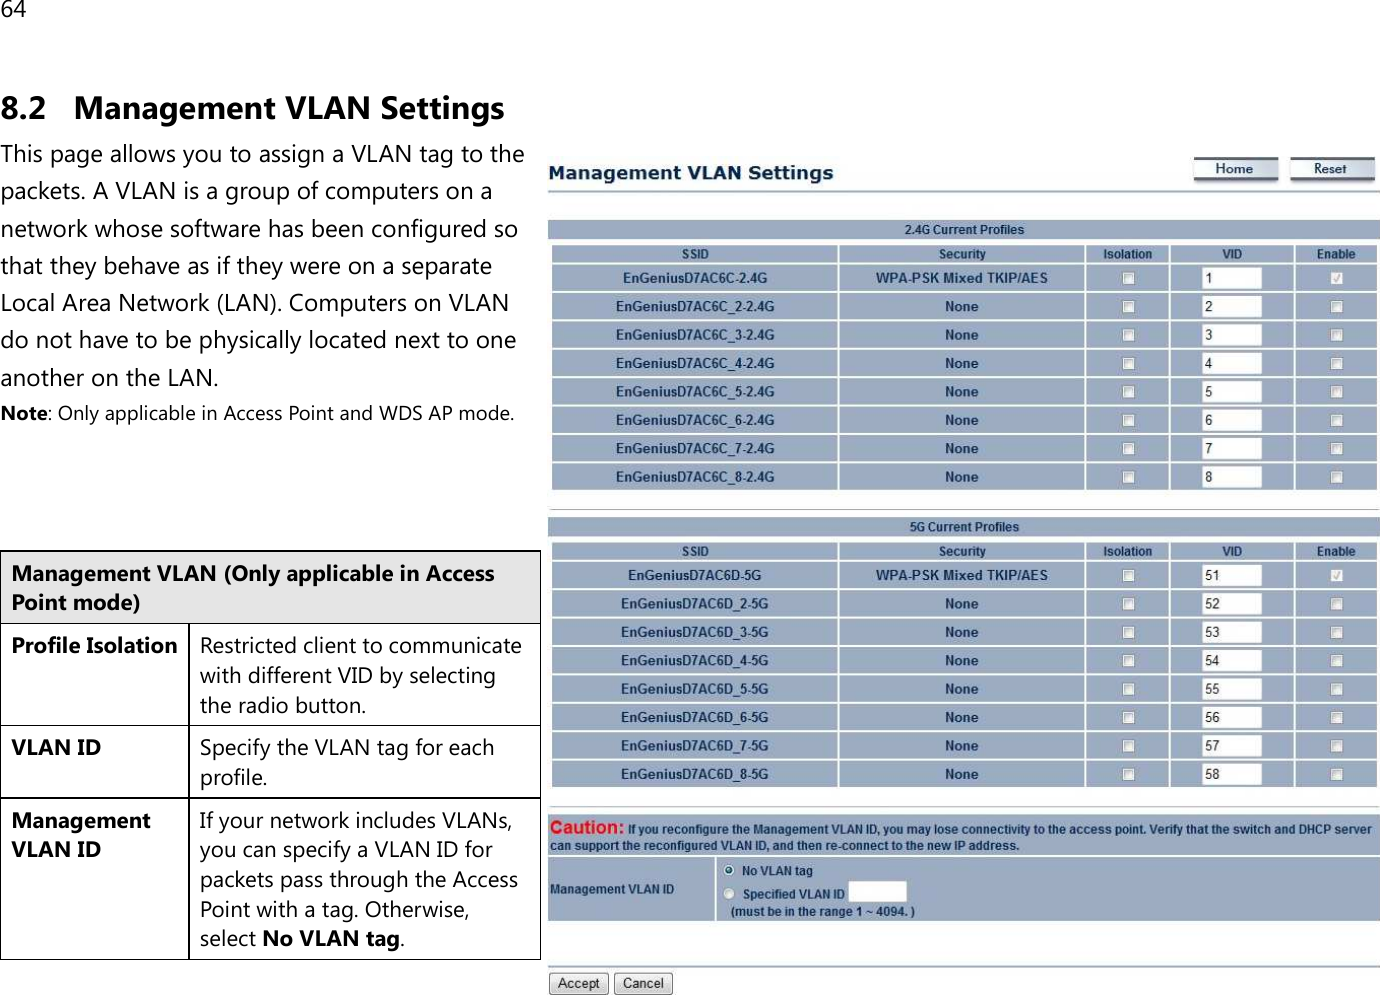 64  8.2 Management VLAN Settings This page allows you to assign a VLAN tag to the packets. A VLAN is a group of computers on a network whose software has been configured so that they behave as if they were on a separate Local Area Network (LAN). Computers on VLAN do not have to be physically located next to one another on the LAN. Note: Only applicable in Access Point and WDS AP mode.    Management VLAN (Only applicable in Access Point mode) Profile Isolation Restricted client to communicate with different VID by selecting the radio button. VLAN ID Specify the VLAN tag for each profile. Management VLAN ID If your network includes VLANs, you can specify a VLAN ID for packets pass through the Access Point with a tag. Otherwise, select No VLAN tag. 